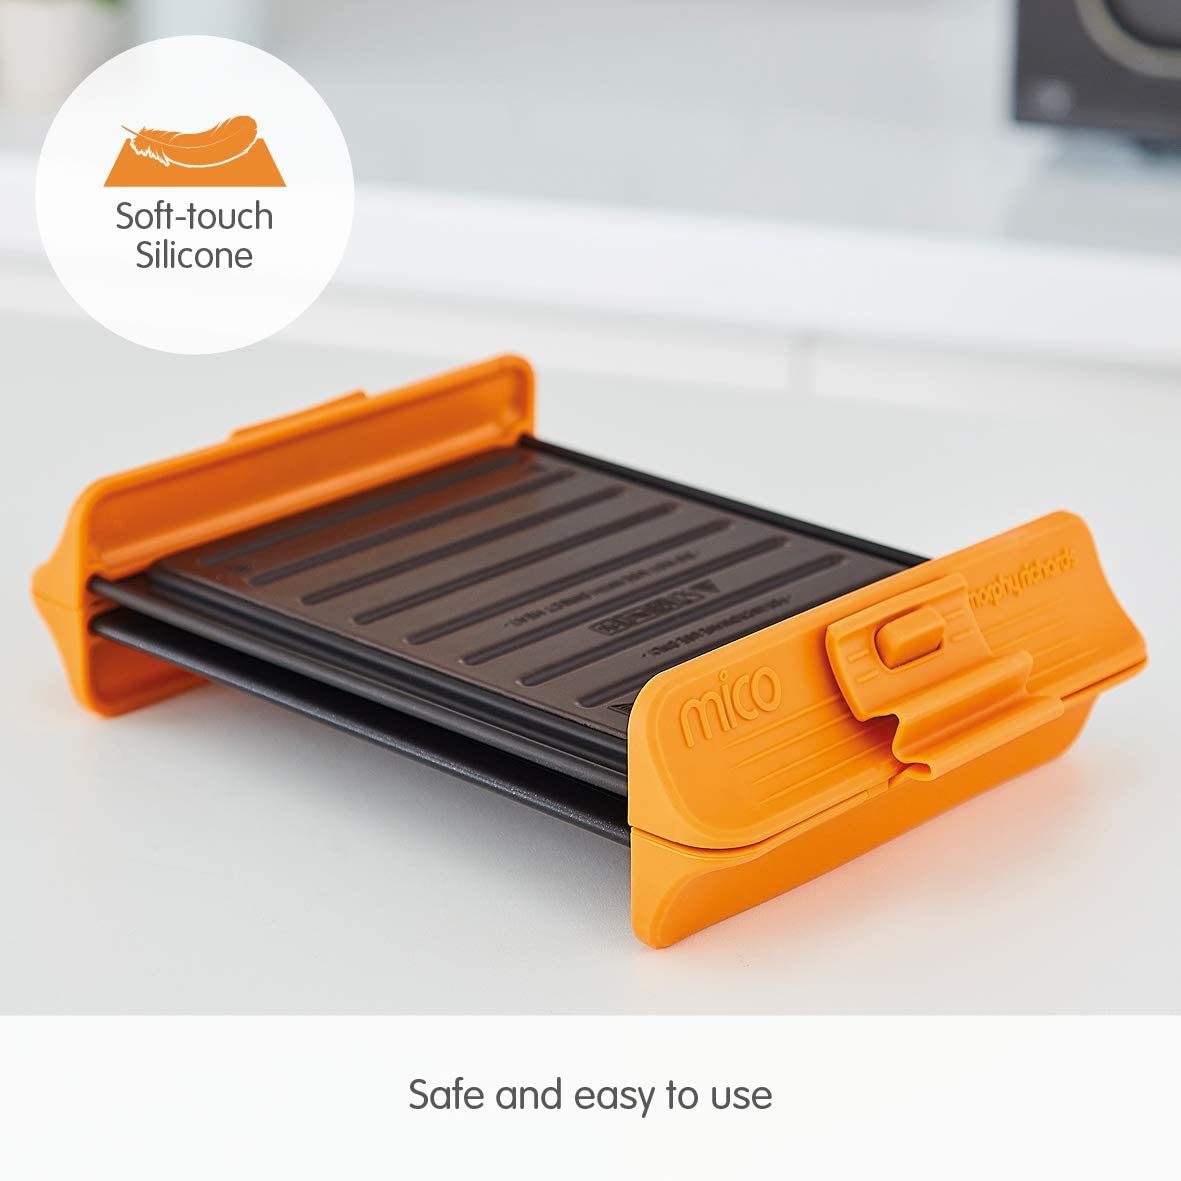 Morphy Richards 511646 Mico Grill Microwavable Cookware, Silicone and coated metal, Orange